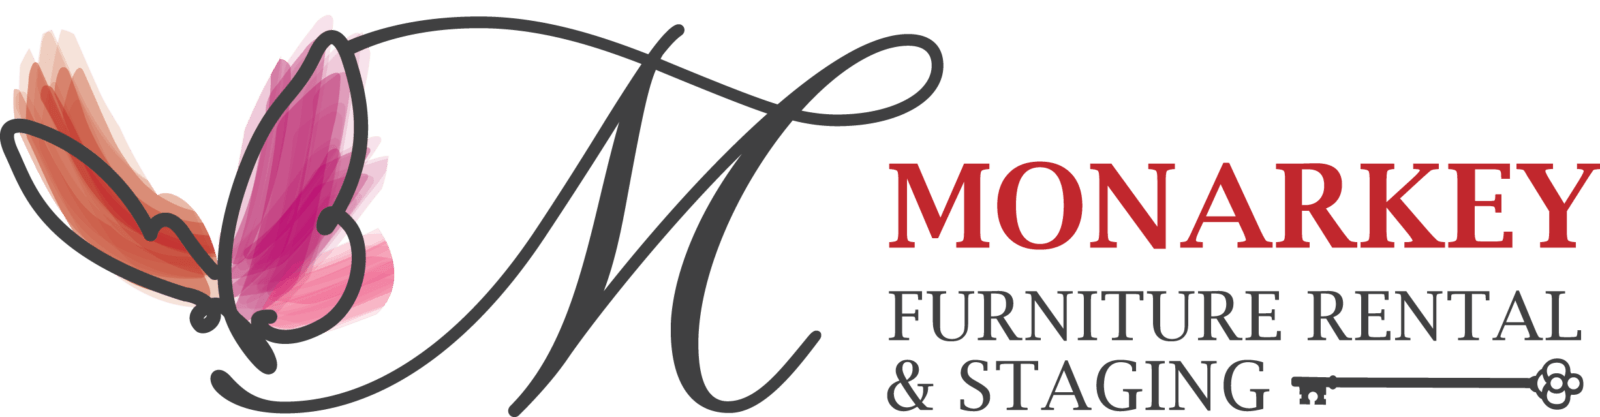 a logo for monarchy furniture rental and staging